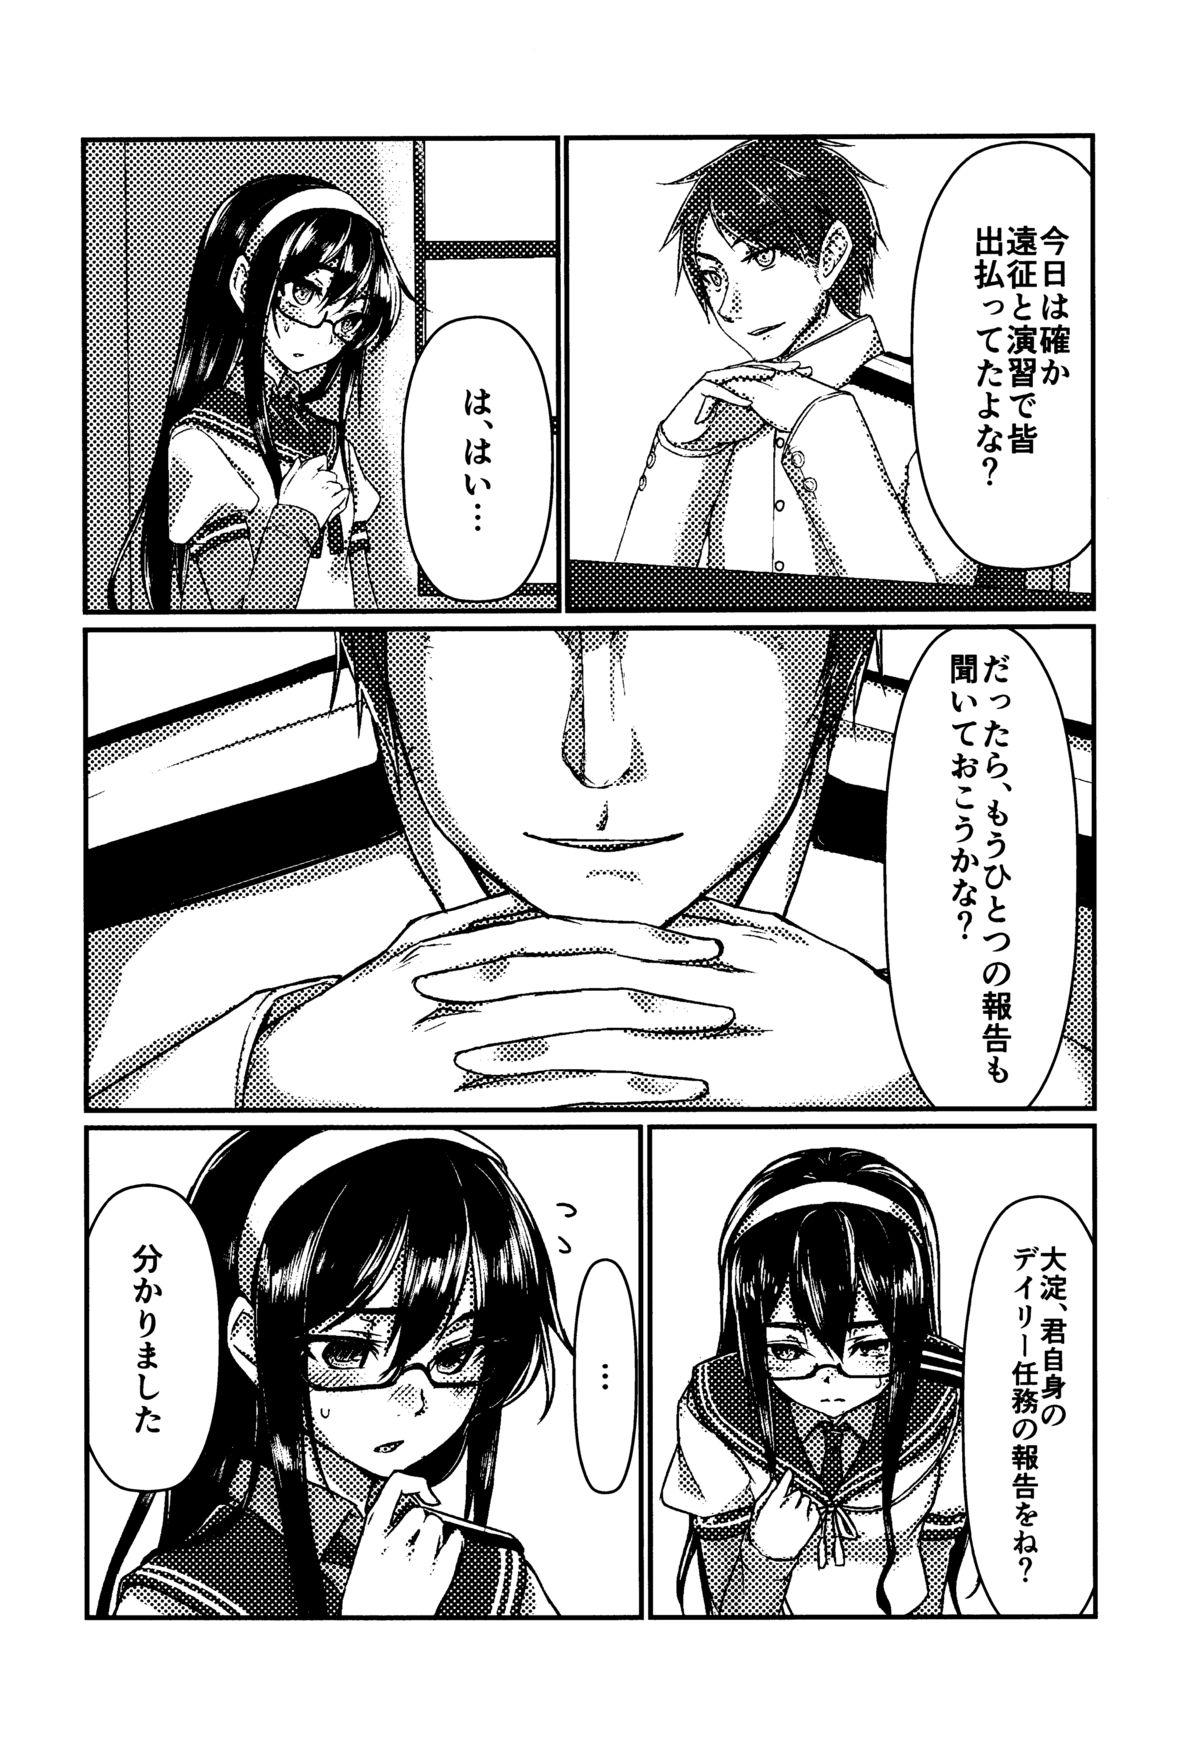 Cop Ooyodo to Daily Ninmu - Kantai collection Ameteur Porn - Page 3